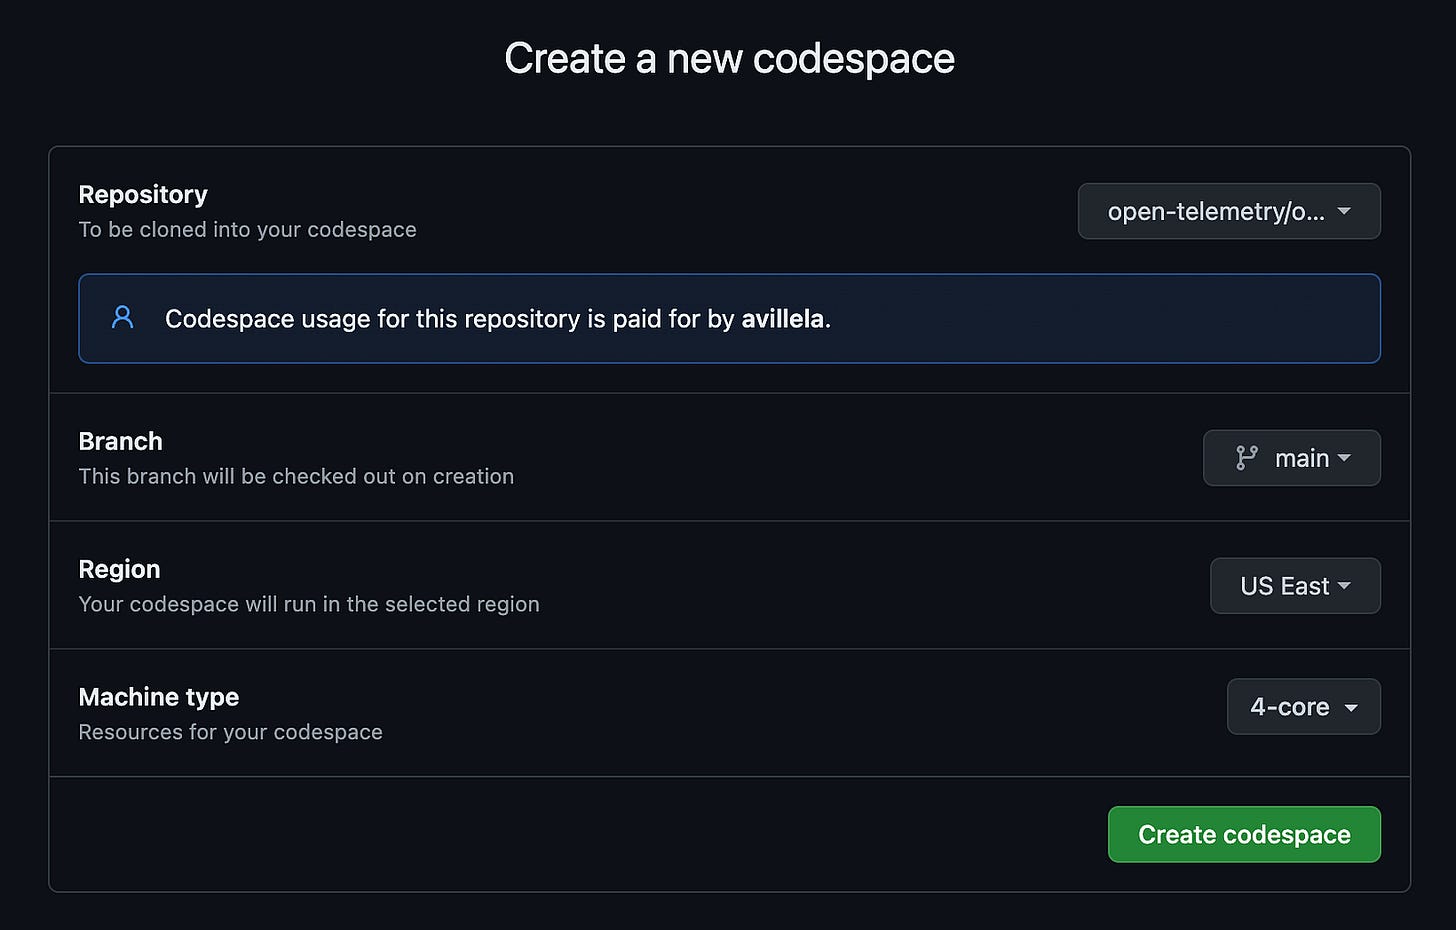 Screen capture depicting the fields that must be filled out when creating a new GitHub Codespace